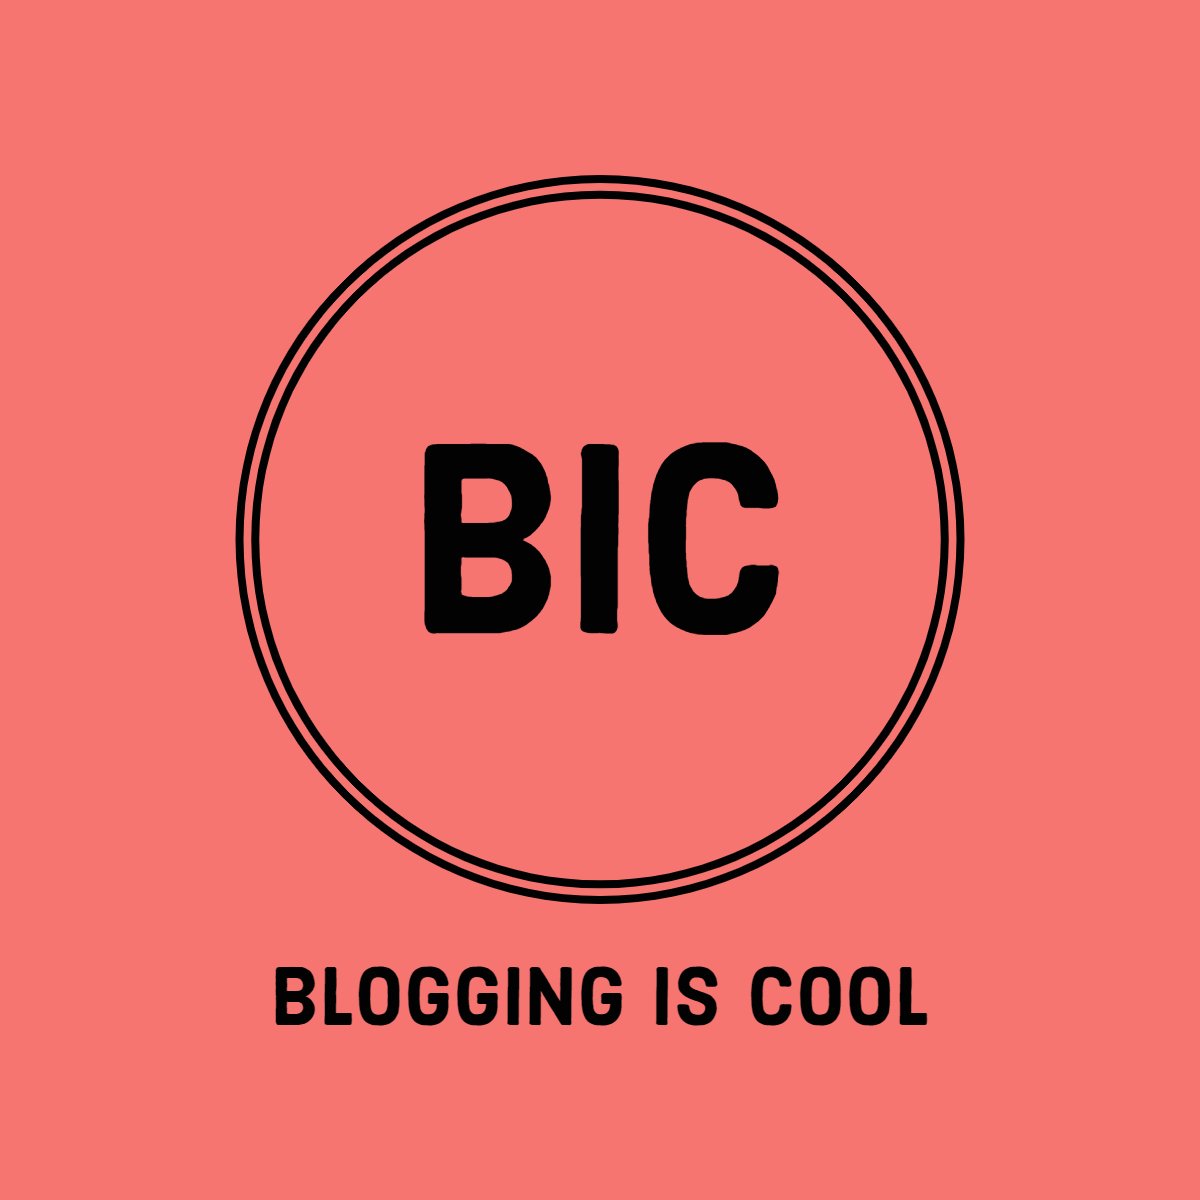 Bloggingiscool.com Why do websites need privacy pages